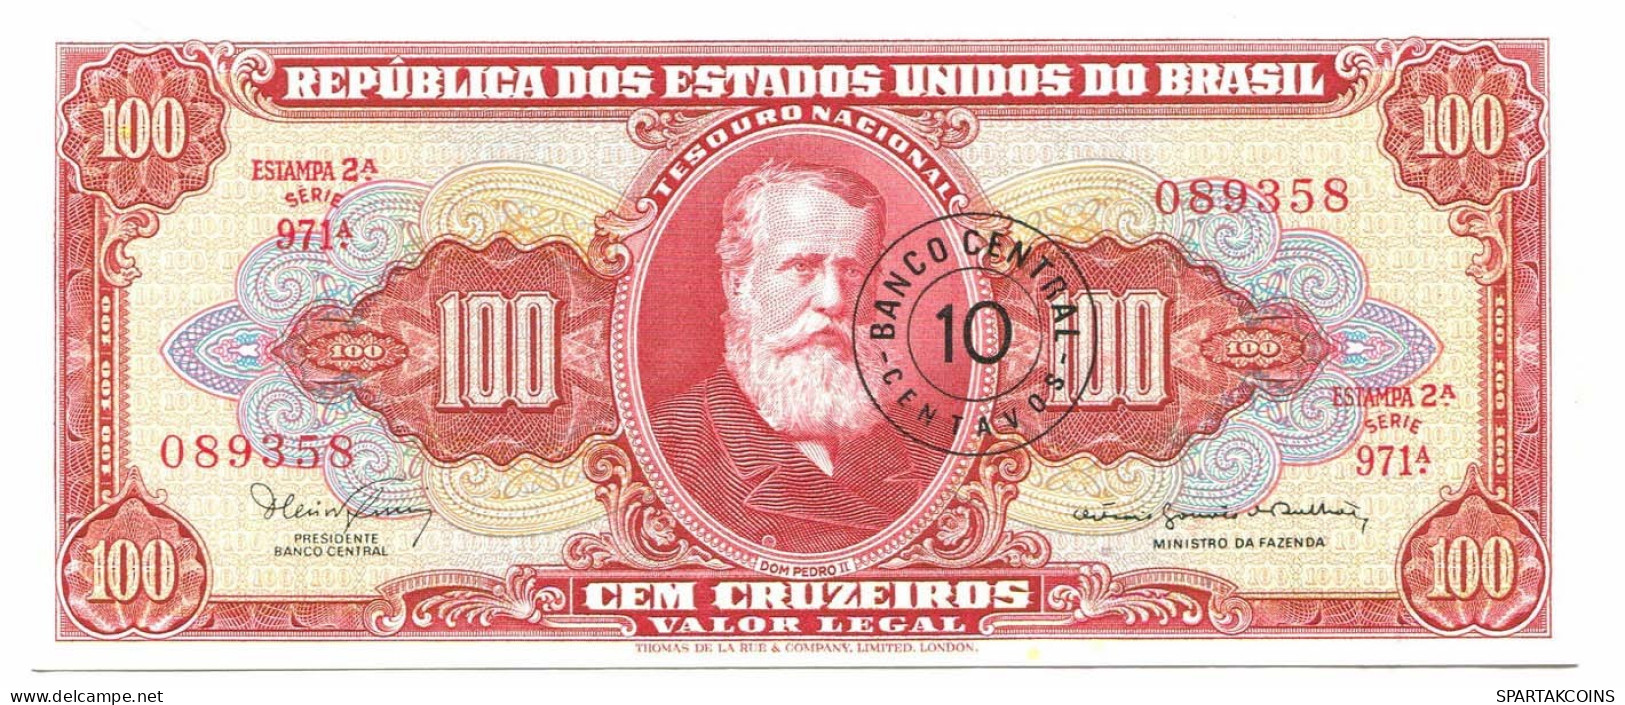 BRASIL 100 CRUZEIROS 1966 SERIE 971A UNC Paper Money Banknote #P10851.4 - [11] Local Banknote Issues